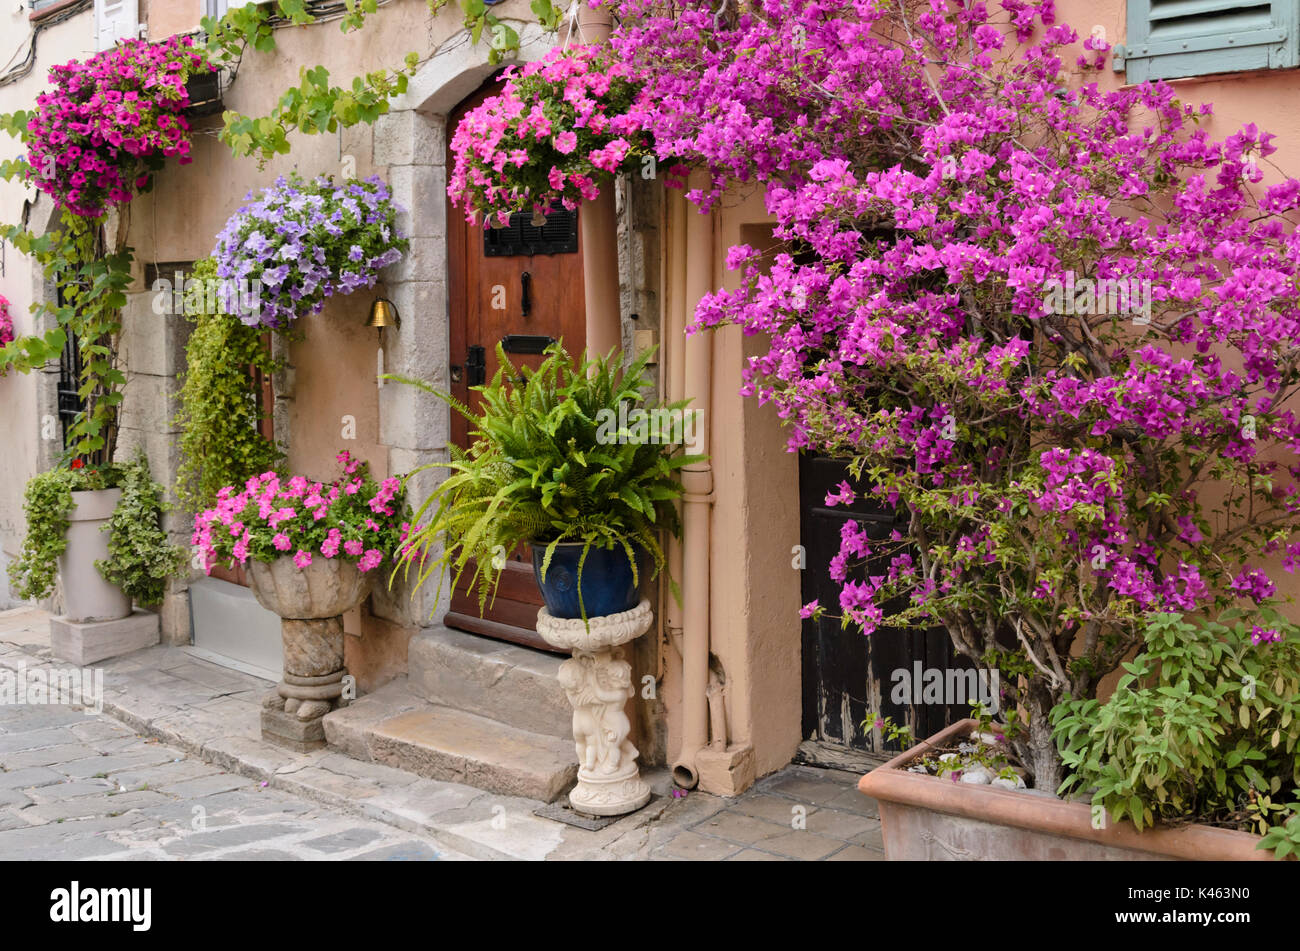 Bougainvillea and petunias (Petunia) in front of an old town house, Cannes, France Stock Photo